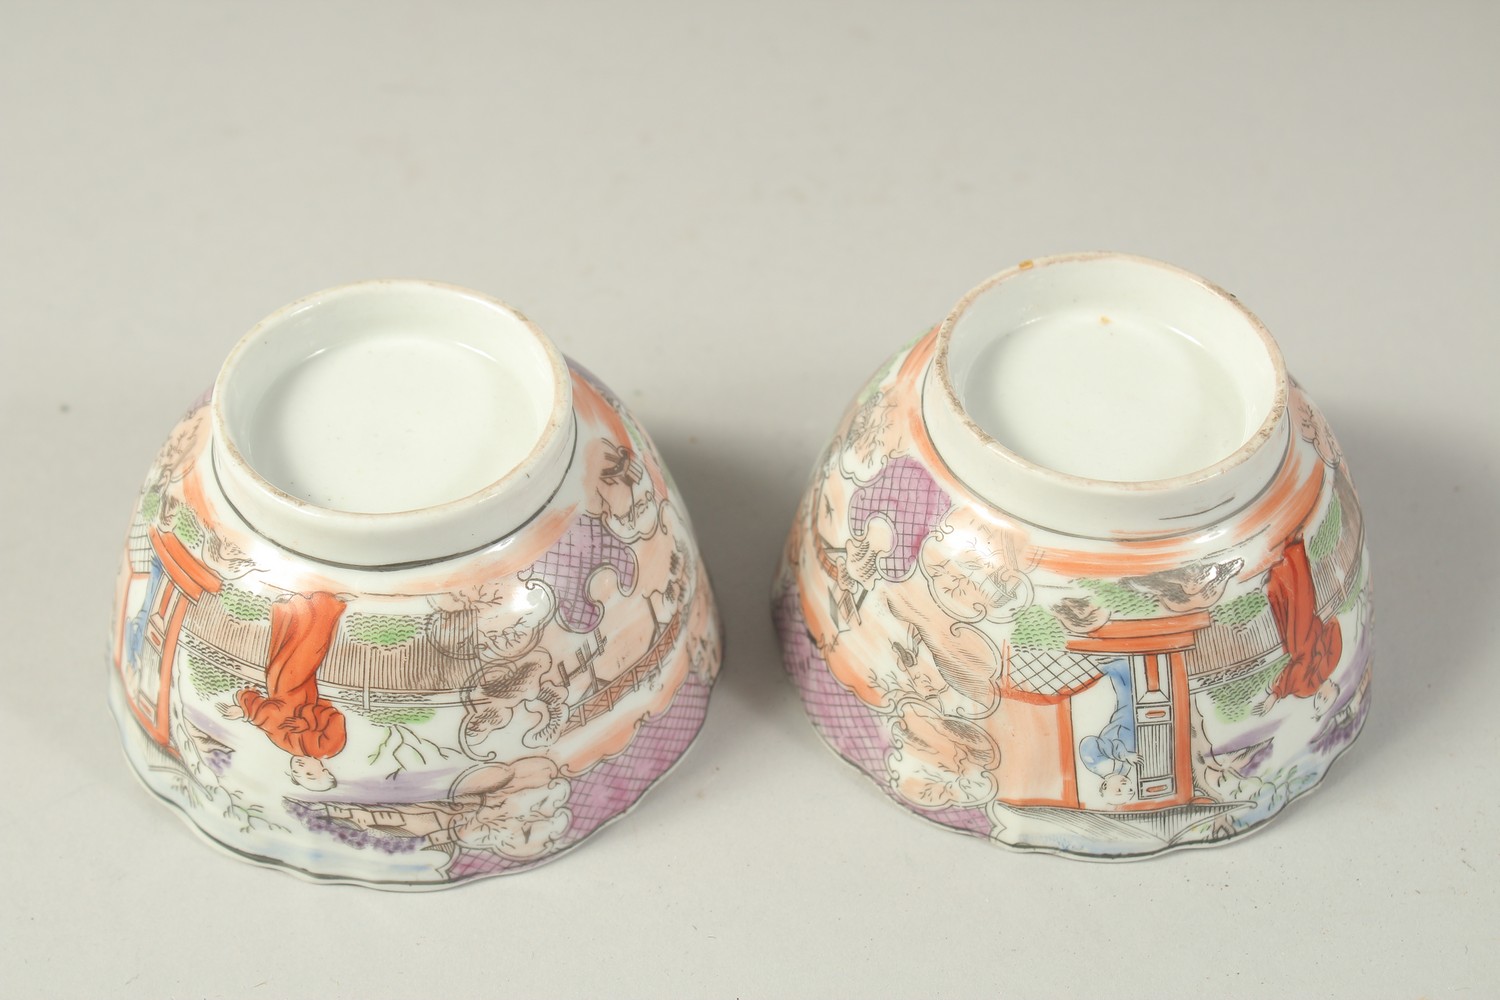 A PAIR OF CHINESE EXPORT PORCELAIN CUPS, each painted with scenes of figures, 8.5cm diameter. - Image 4 of 4